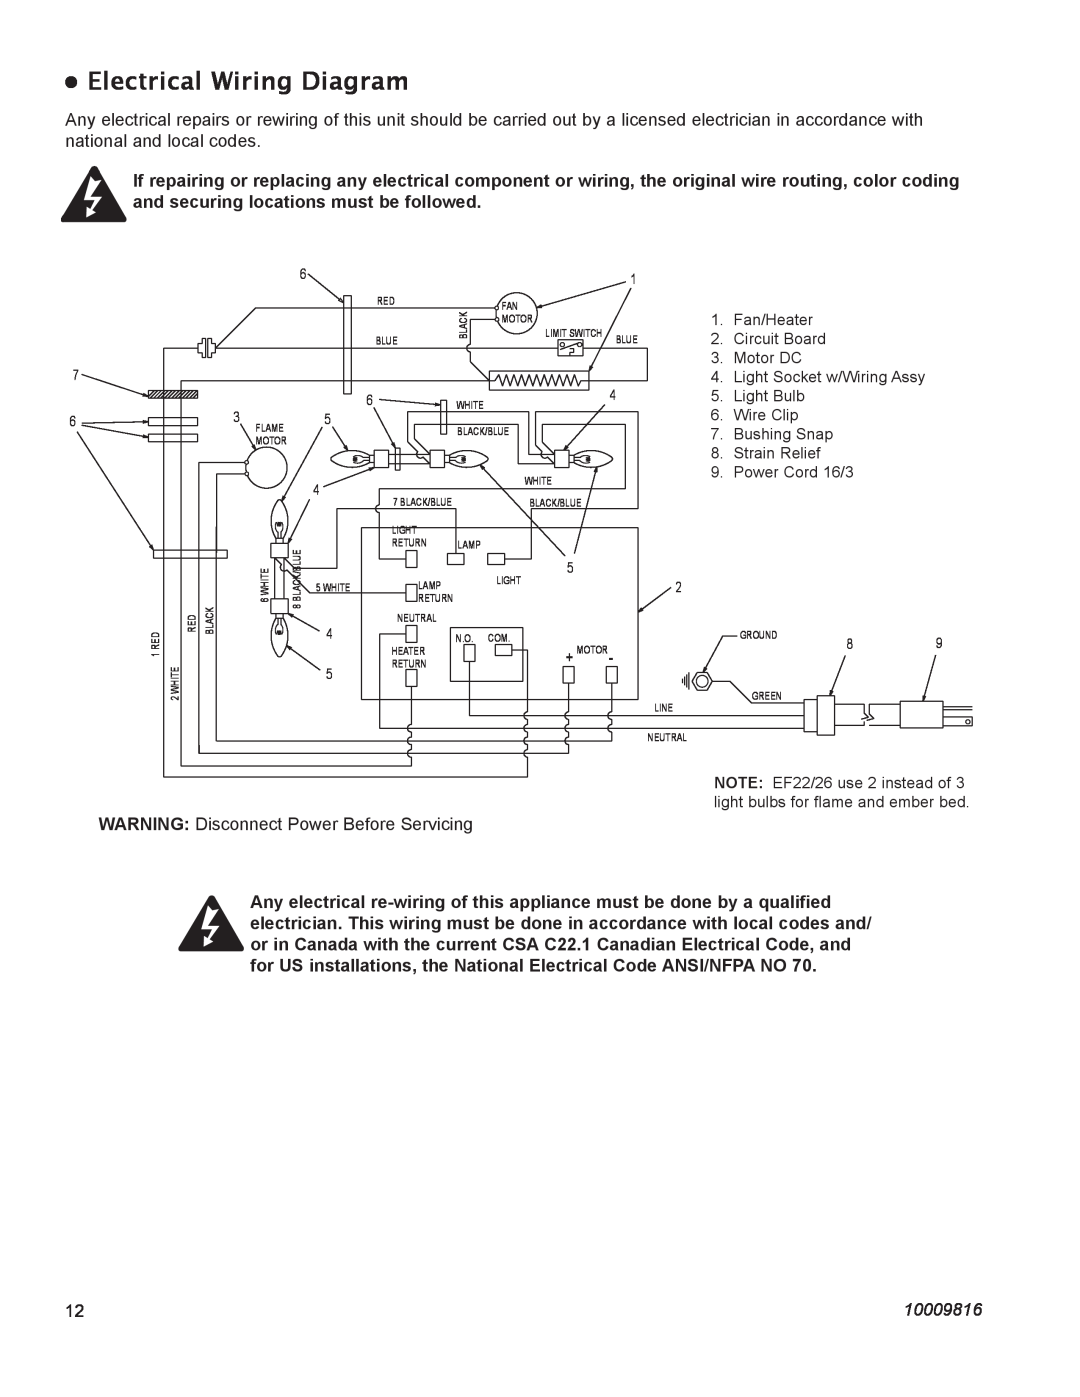 Vermont Casting EF26FG, EF22 Electrical Wiring Diagram, WARNING Disconnect Power Before Servicing, 10009816 